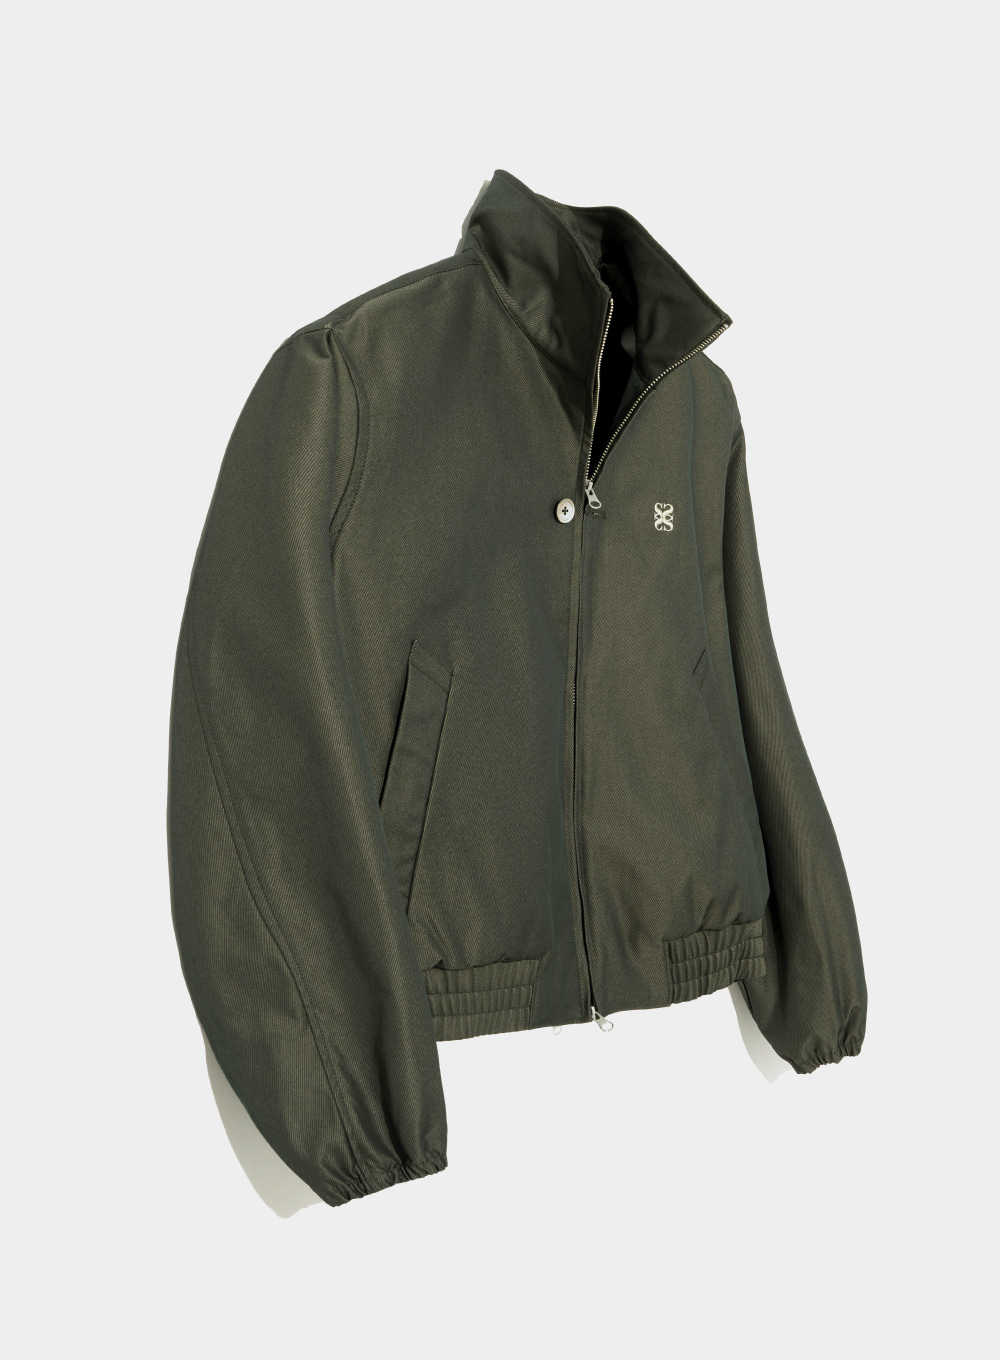 Lecce Two Tone Zip Up Jacket - Glitter Green Brown